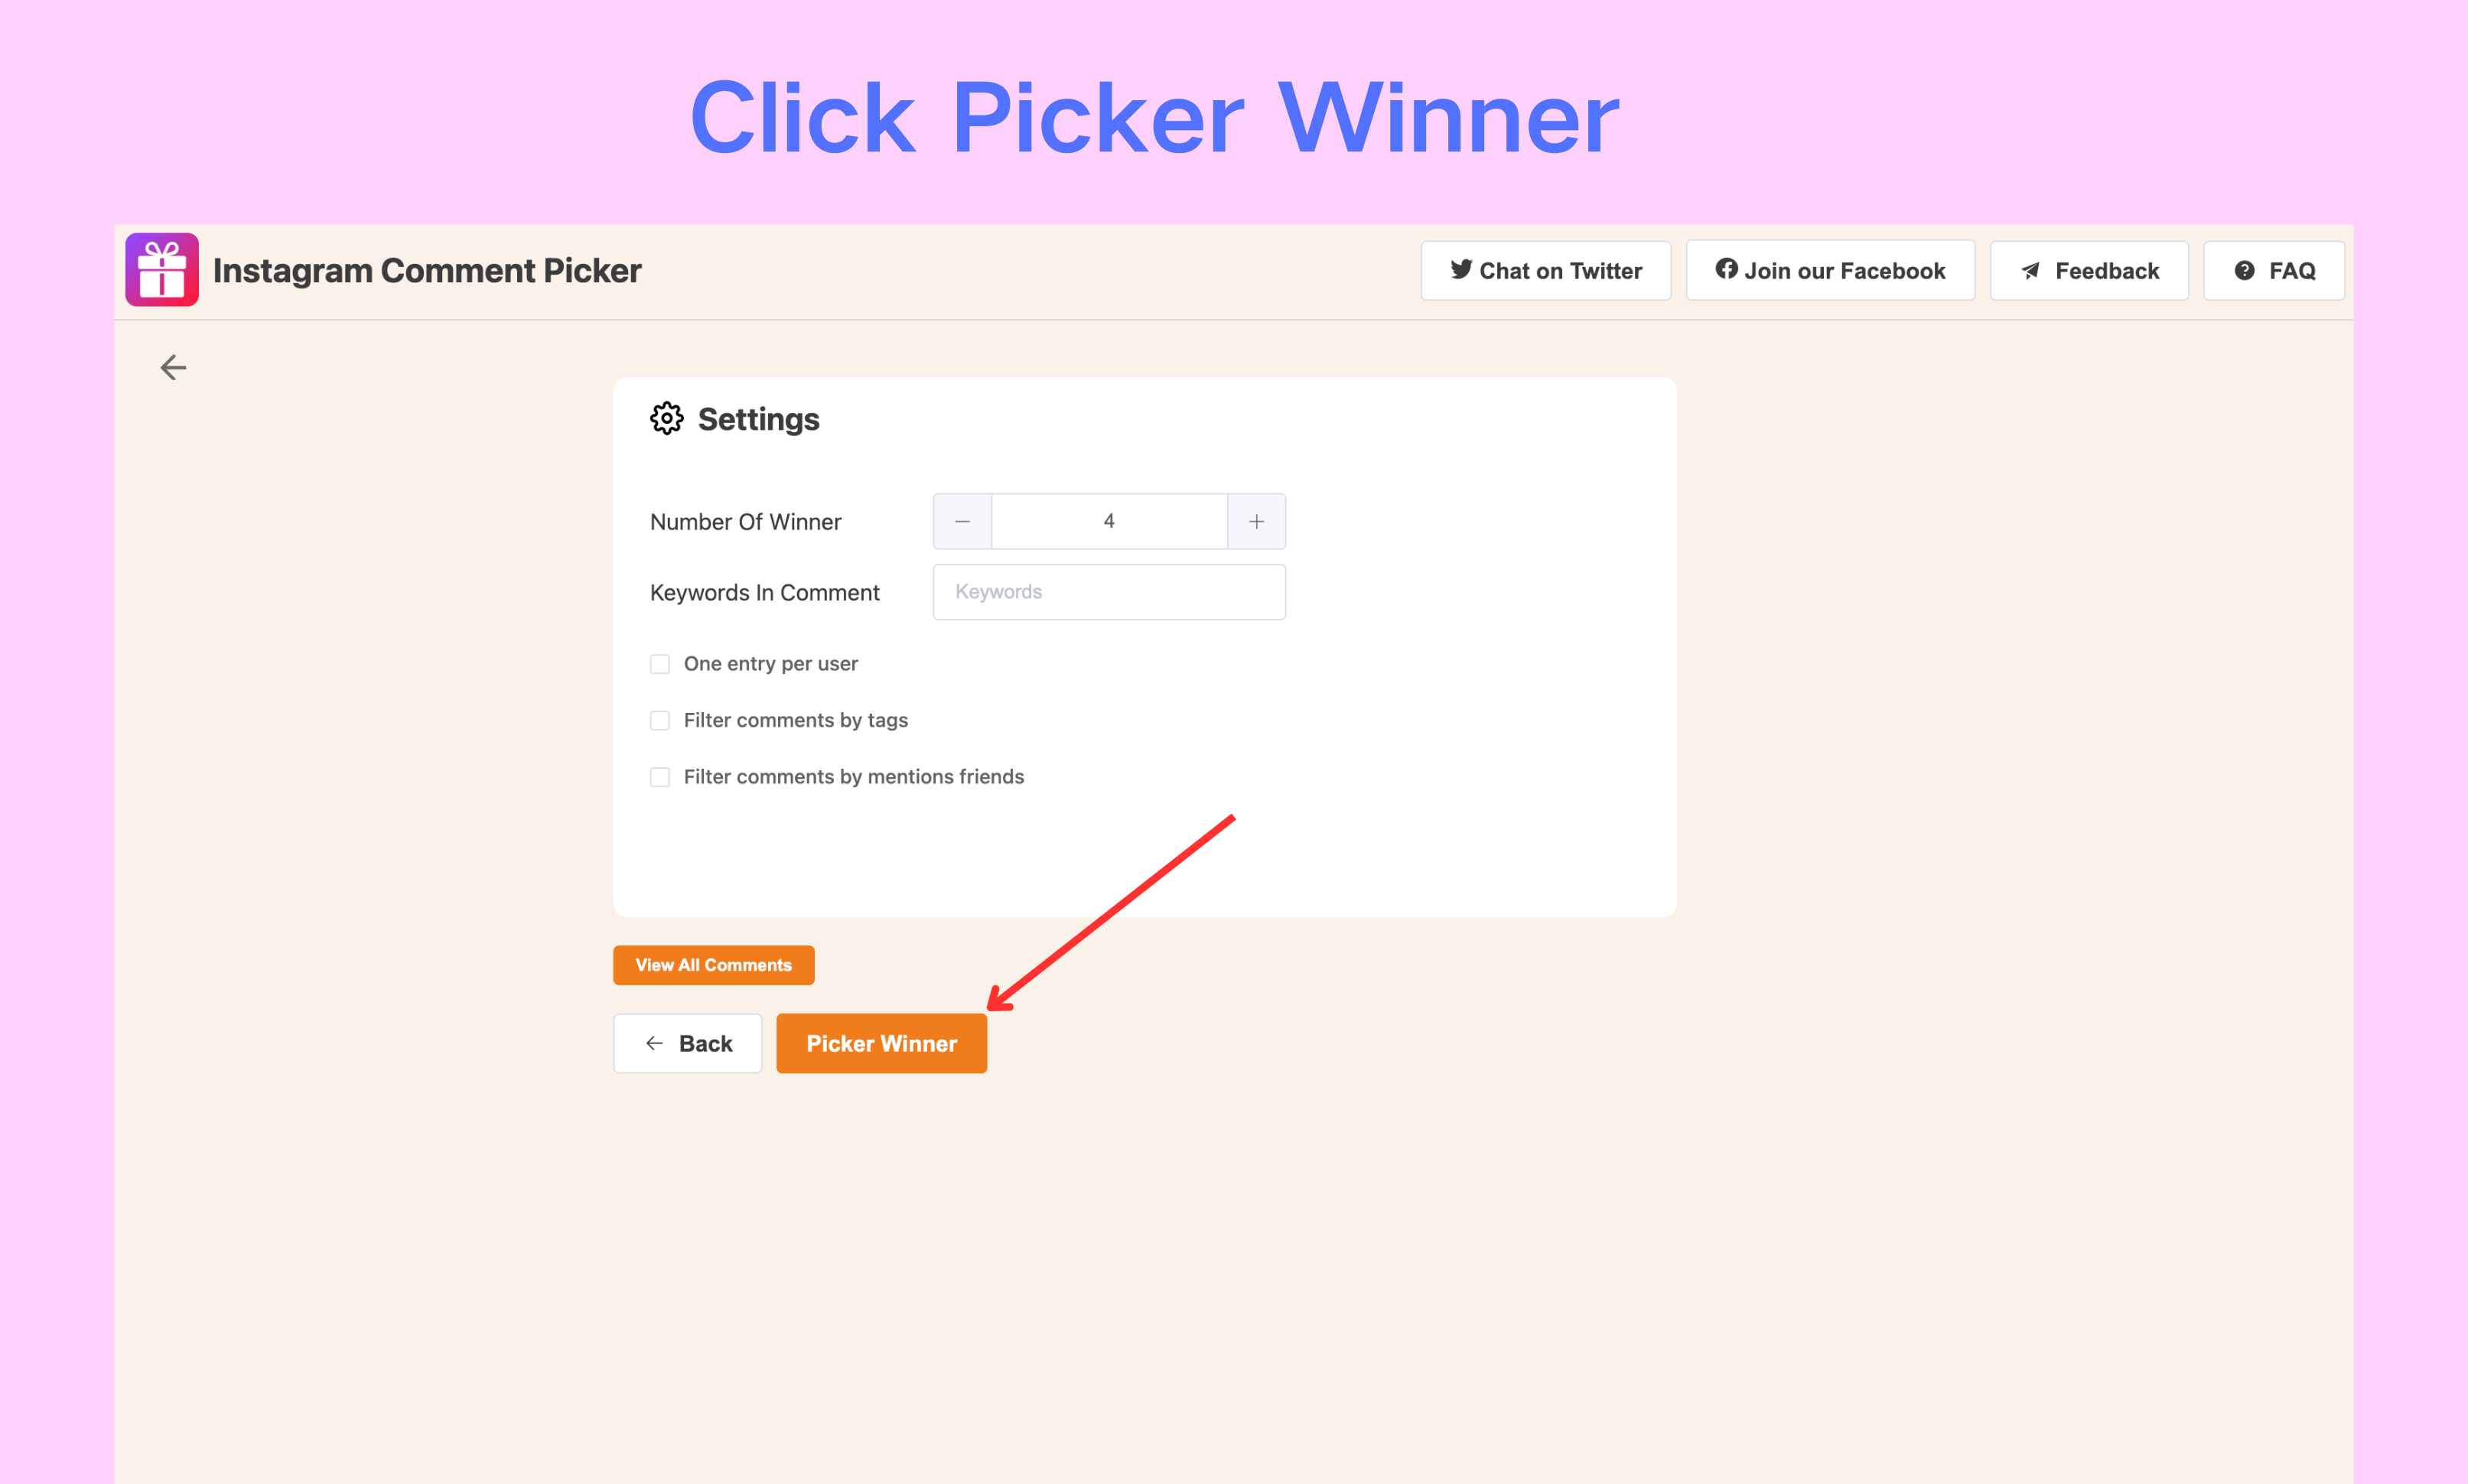 Step 4: Set up your draw configuration And Click "Picker Winner"  button to start the draw